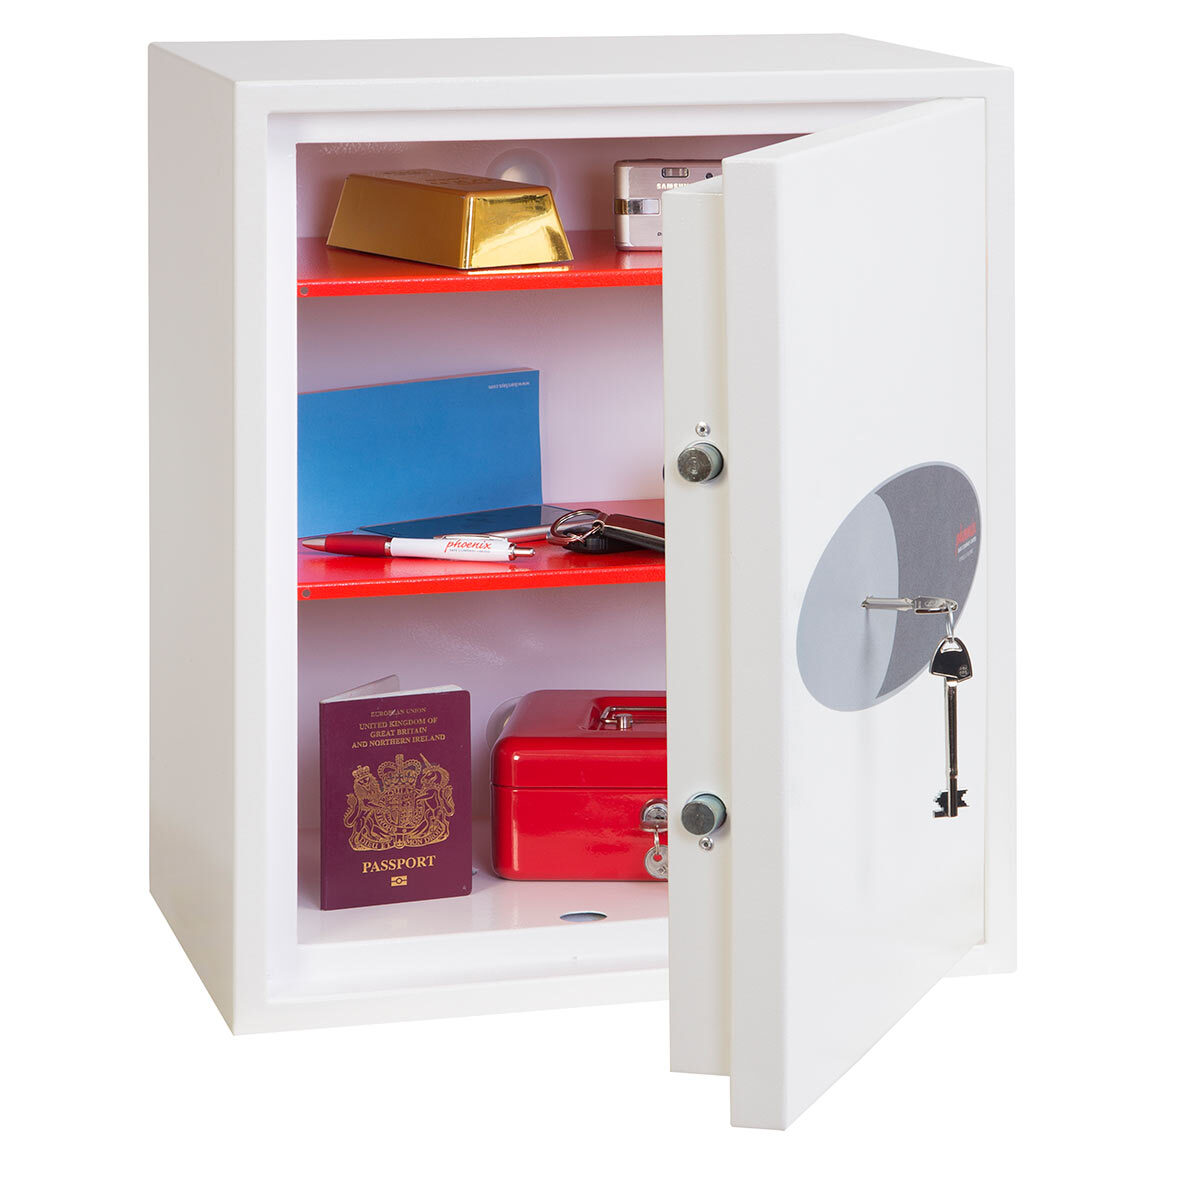 Cut out image of partially opened safe on white background